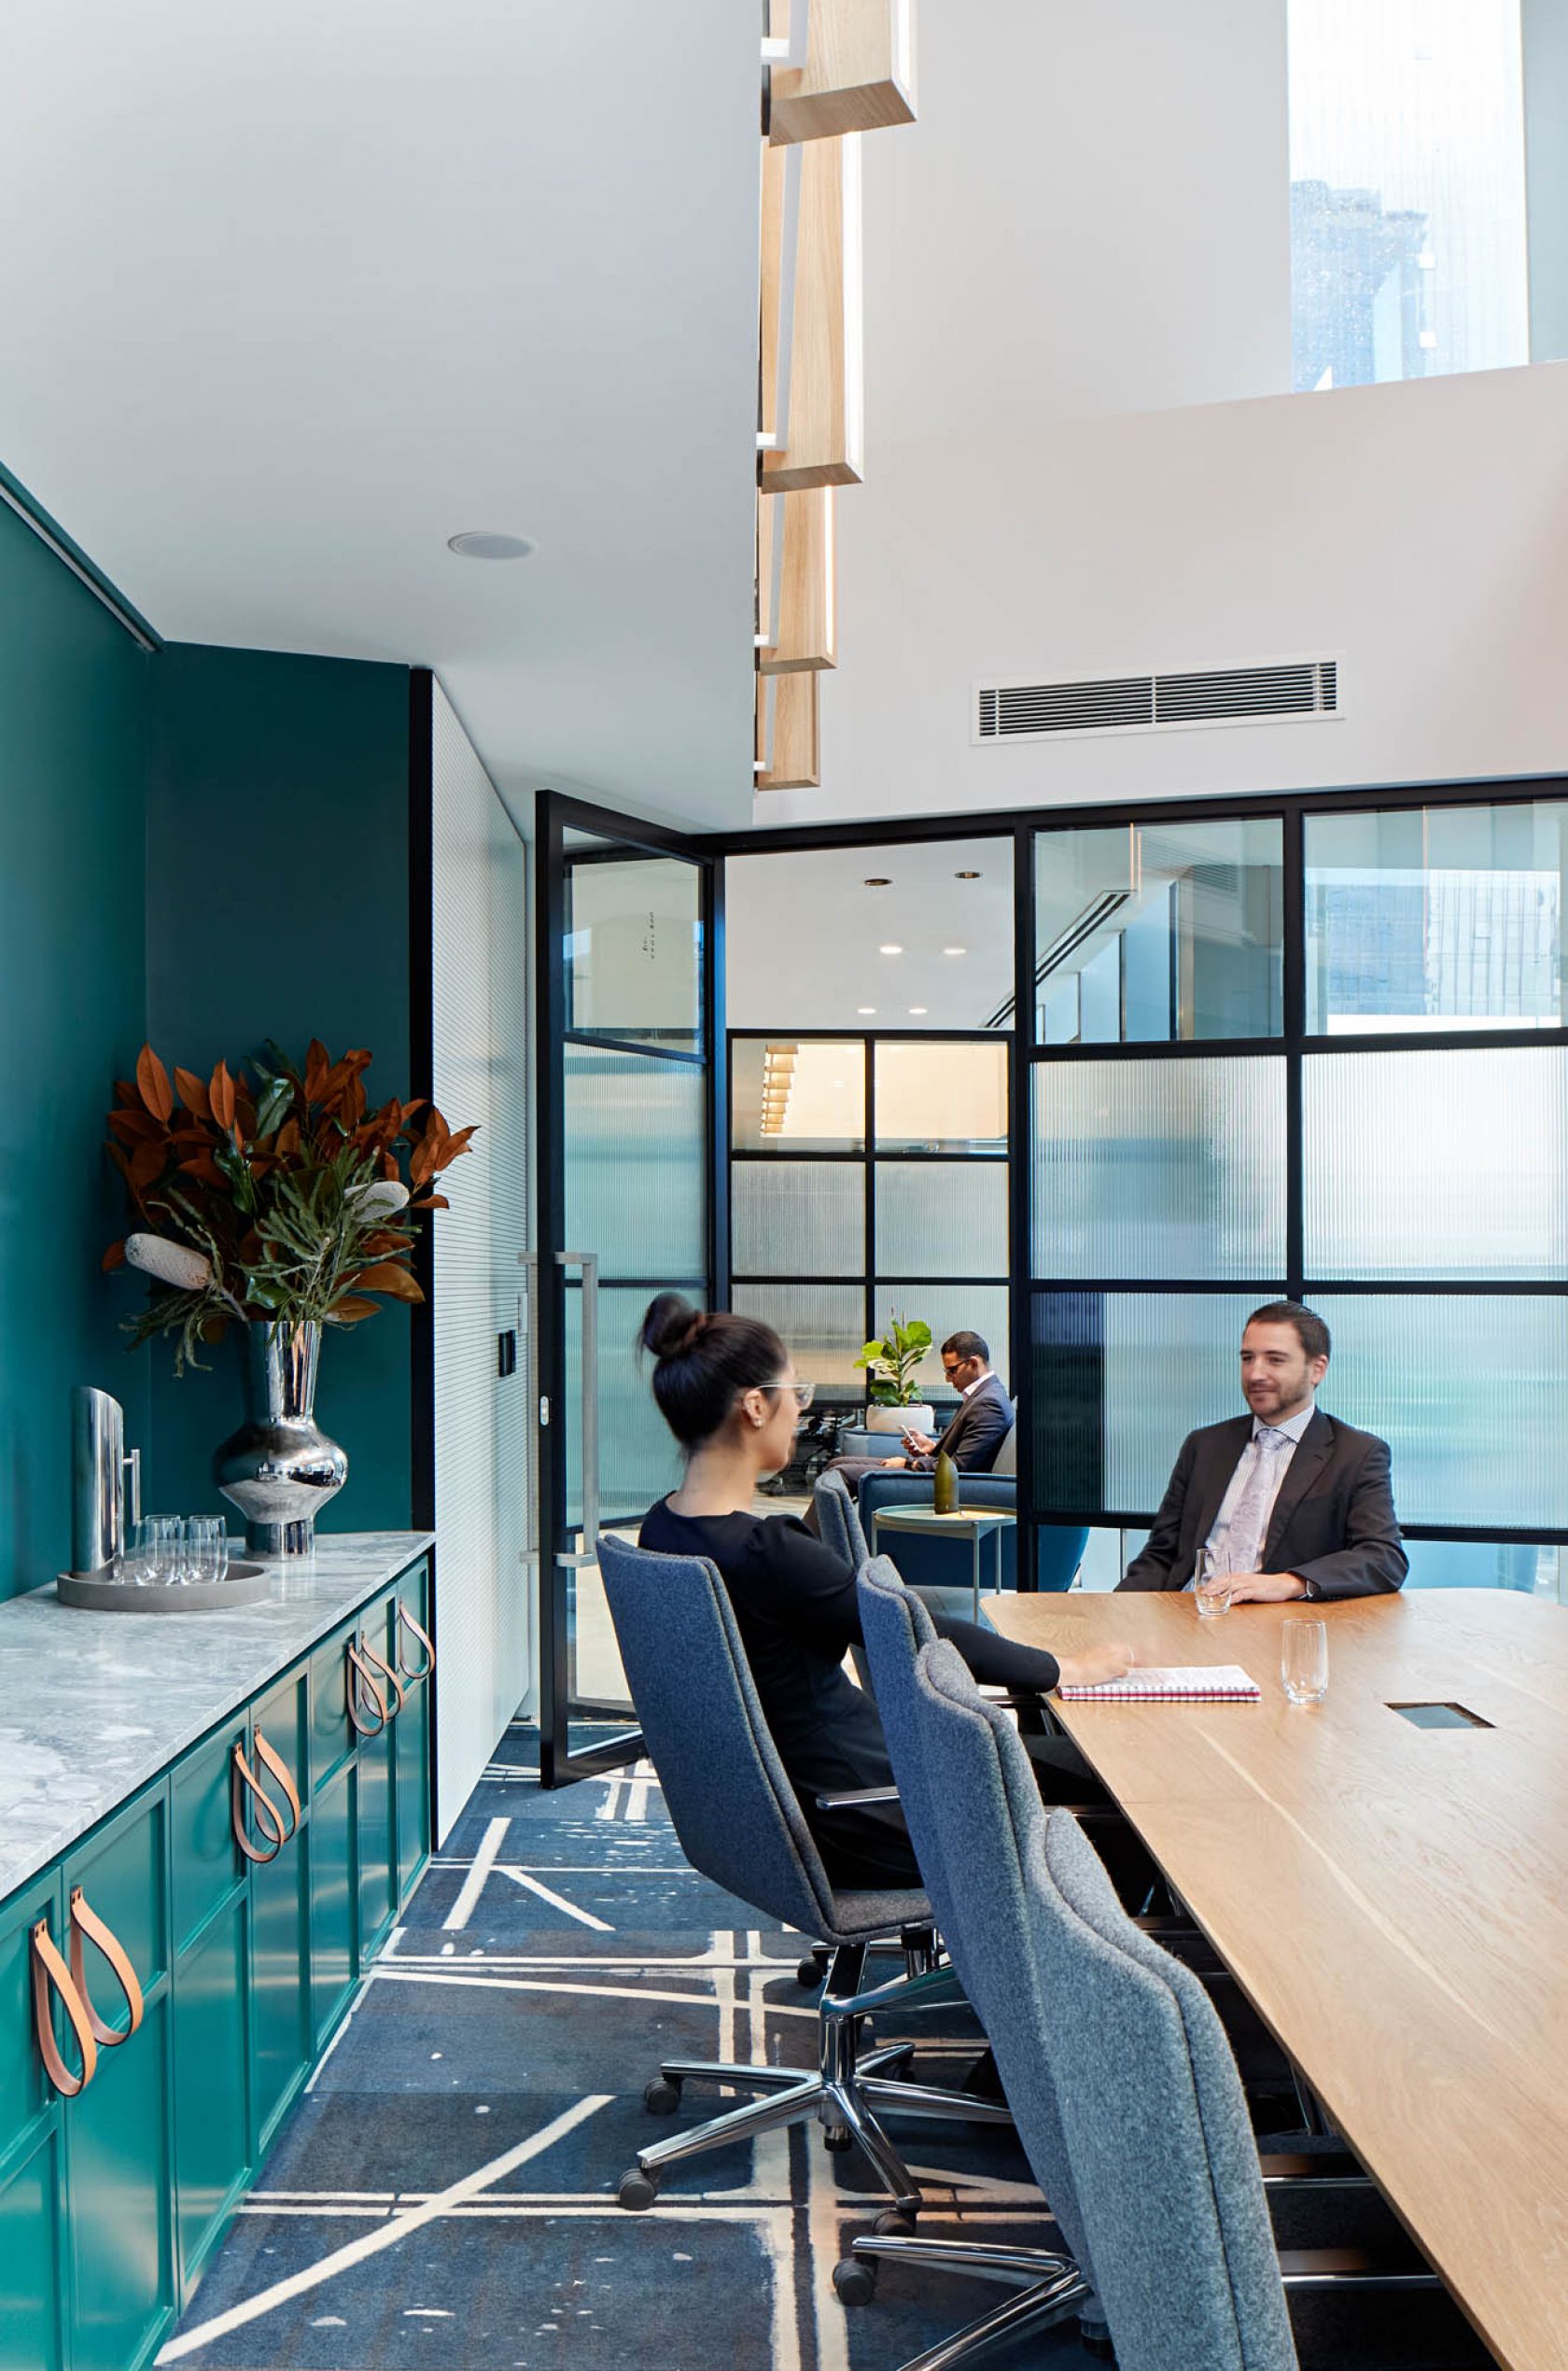 bank of melbourne office meeting room with green cabinets and gold strap handles